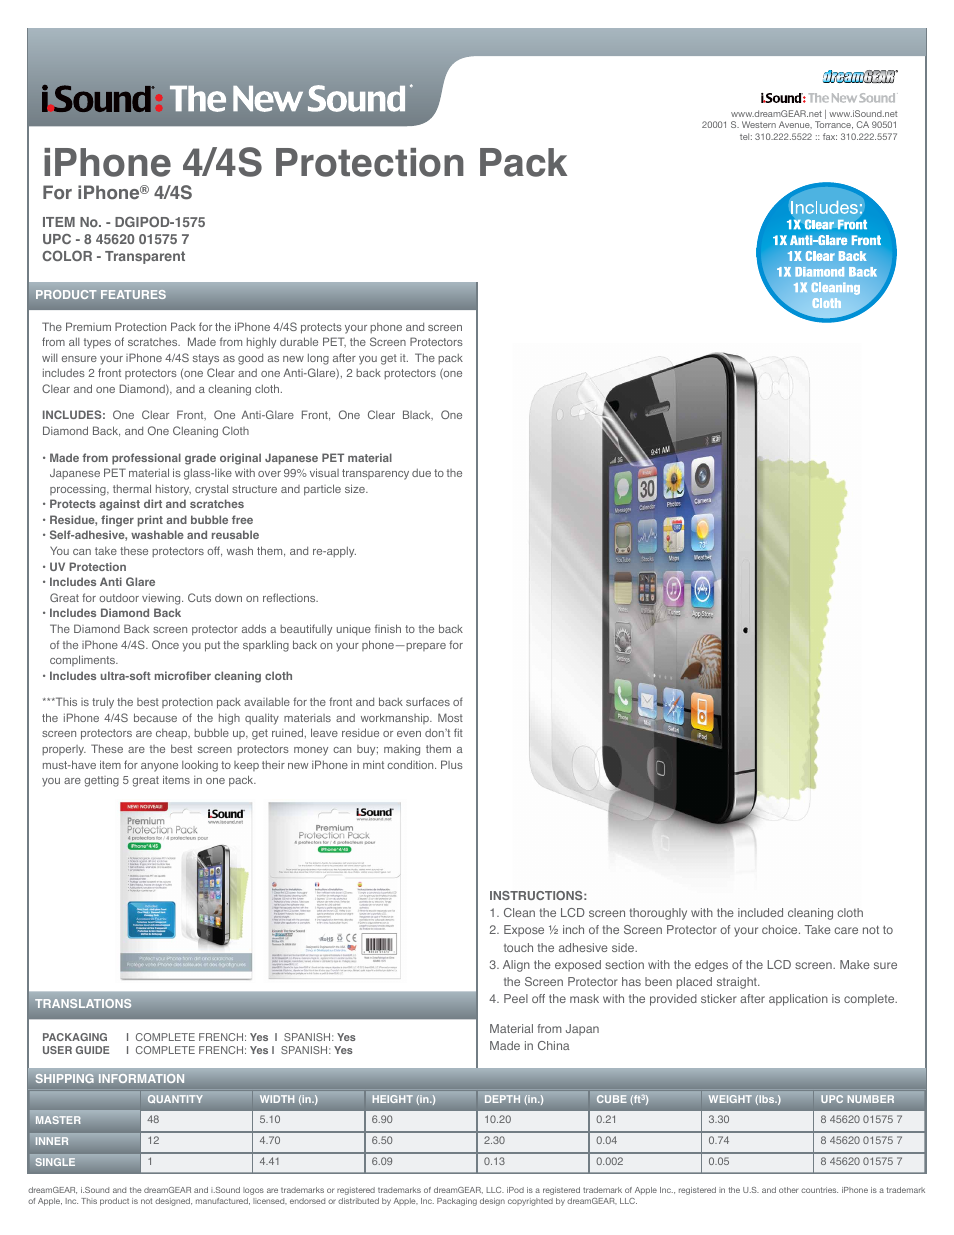 Premium Protection Pack for iPhone 4-4S - Sell Sheet